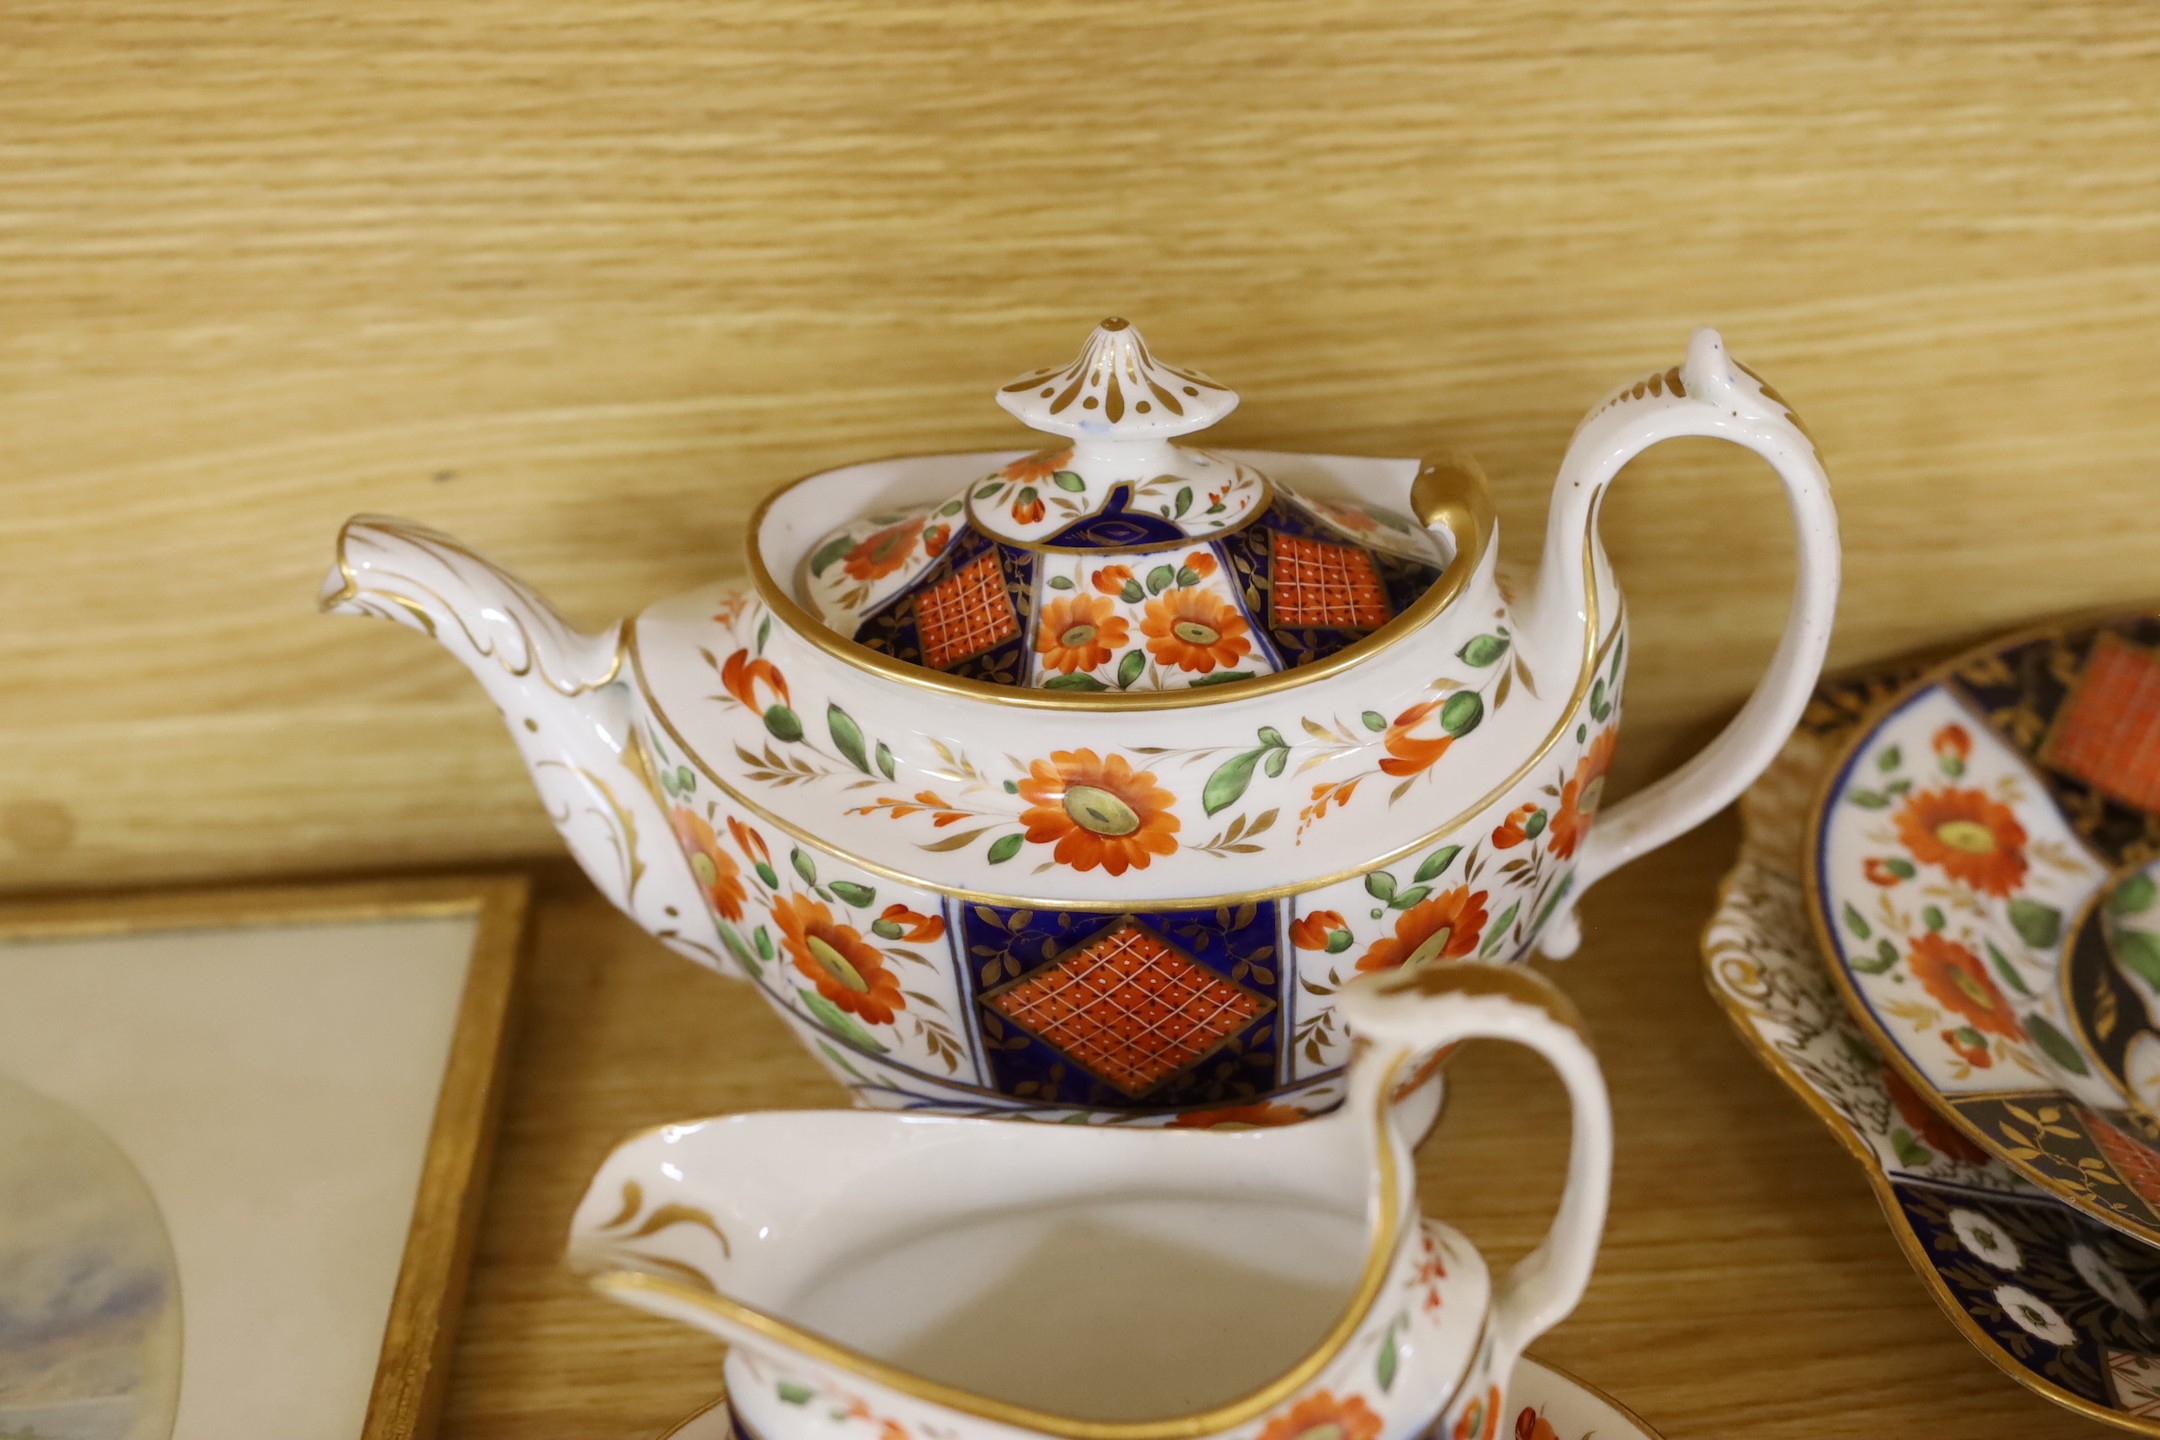 A 19th century English porcelain part tea and coffee set, probably Coalport and a similar Wedgwood part set